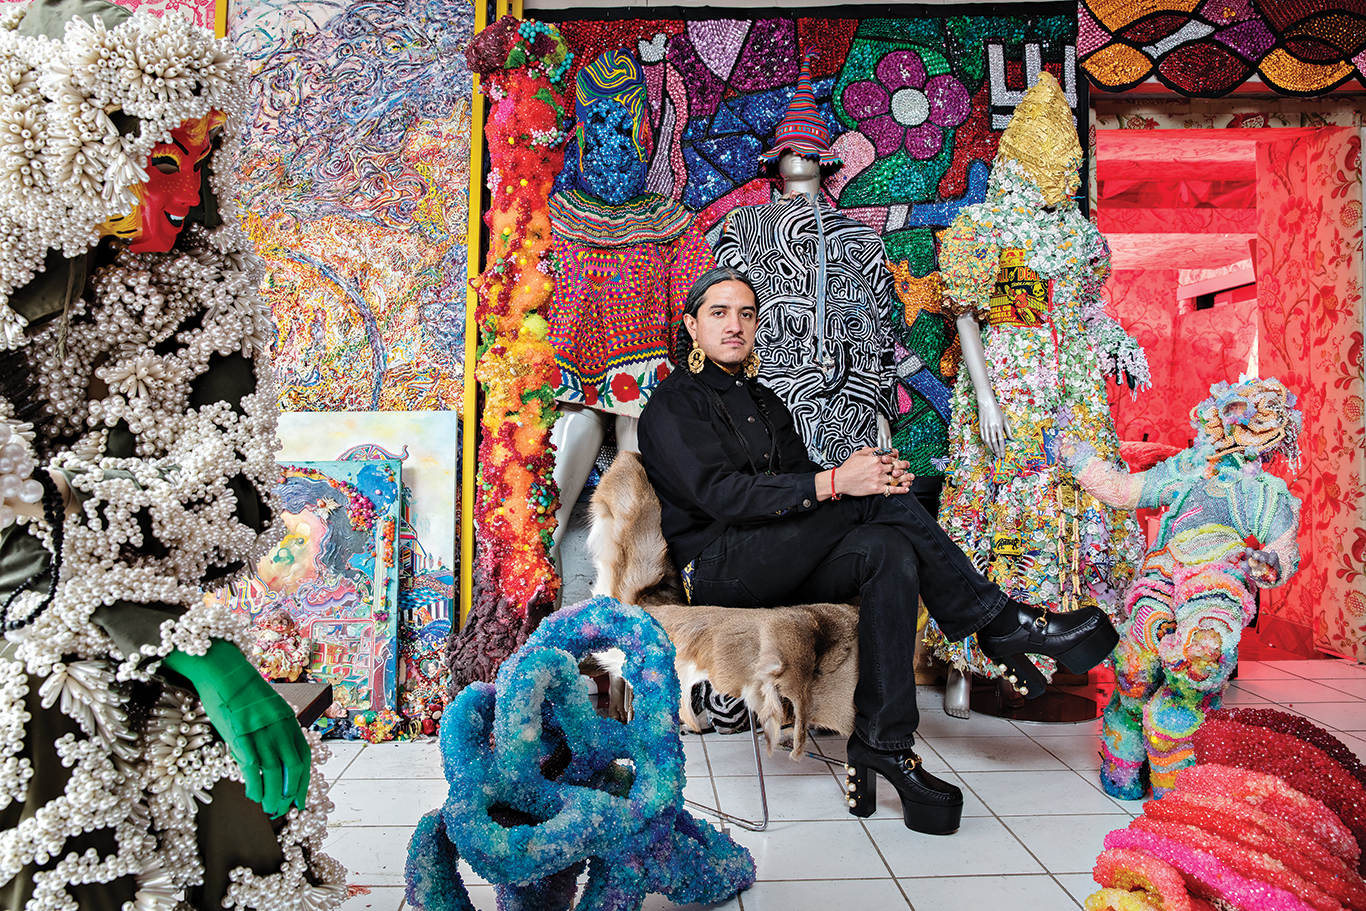 Artist Raúl de Nieves seated, surrounded by his colorful artwork.